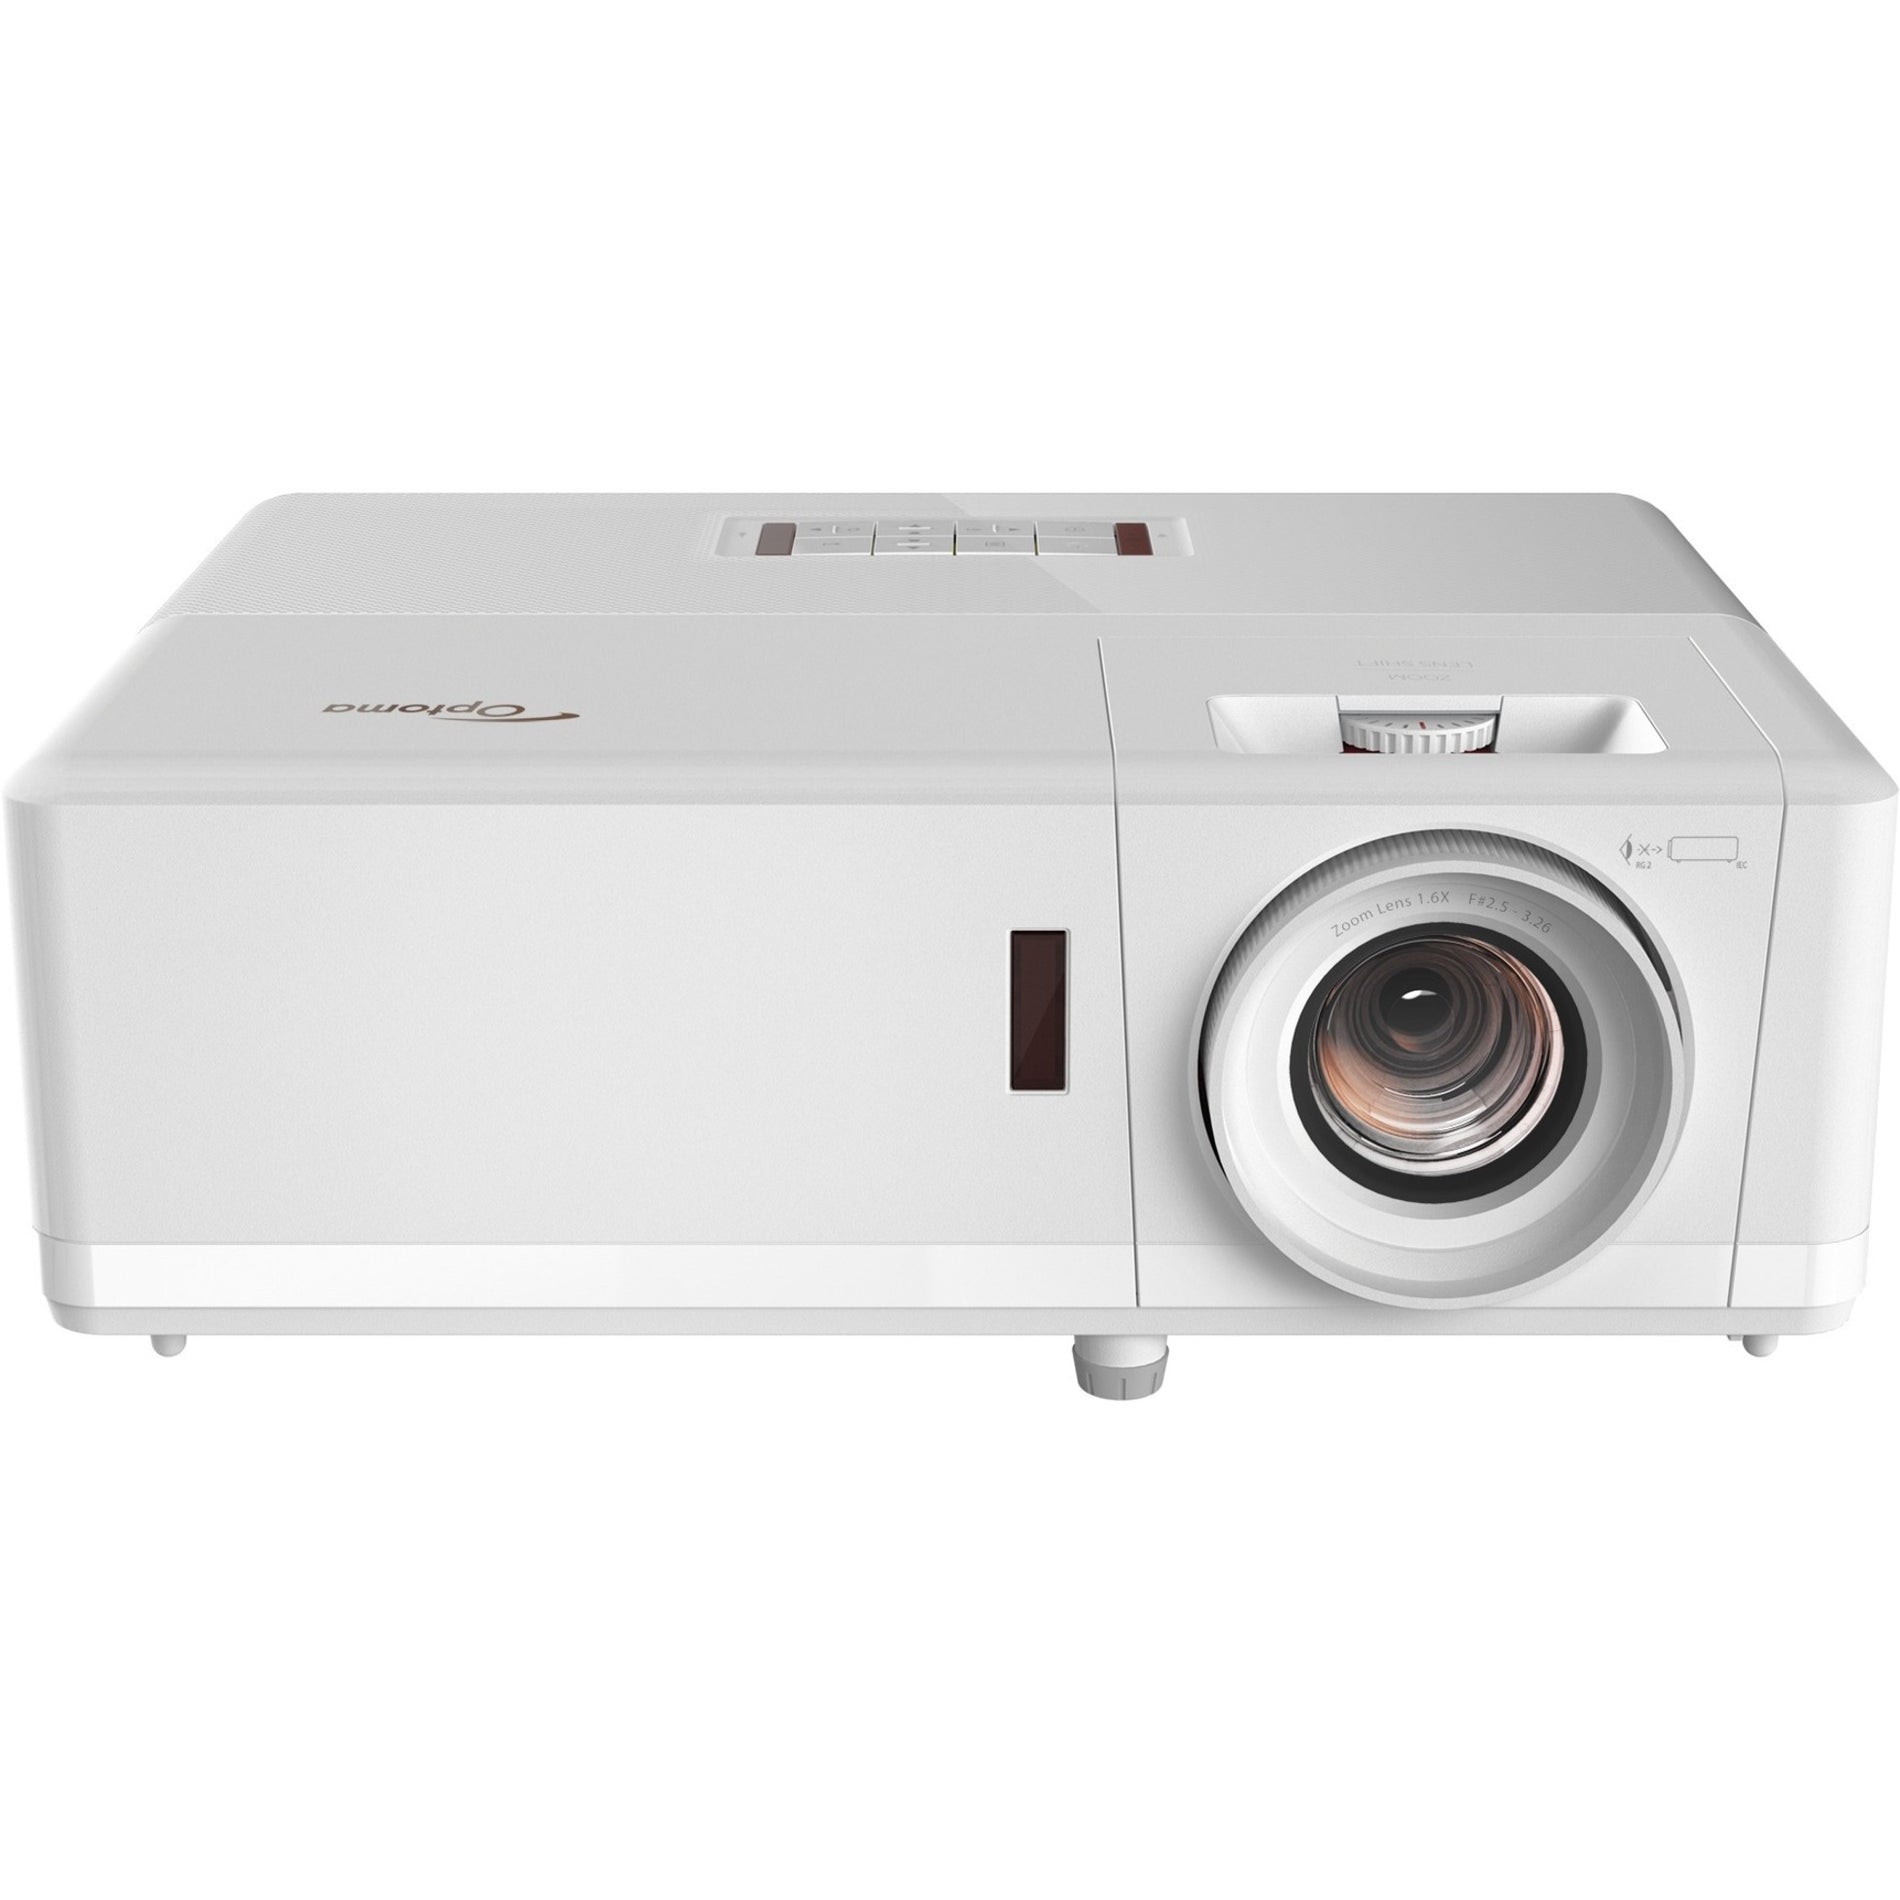 Optoma ZH406 Compact High Brightness Laser Projector, 1080p, 4500 lm, 20,000 Hour Lamp Life